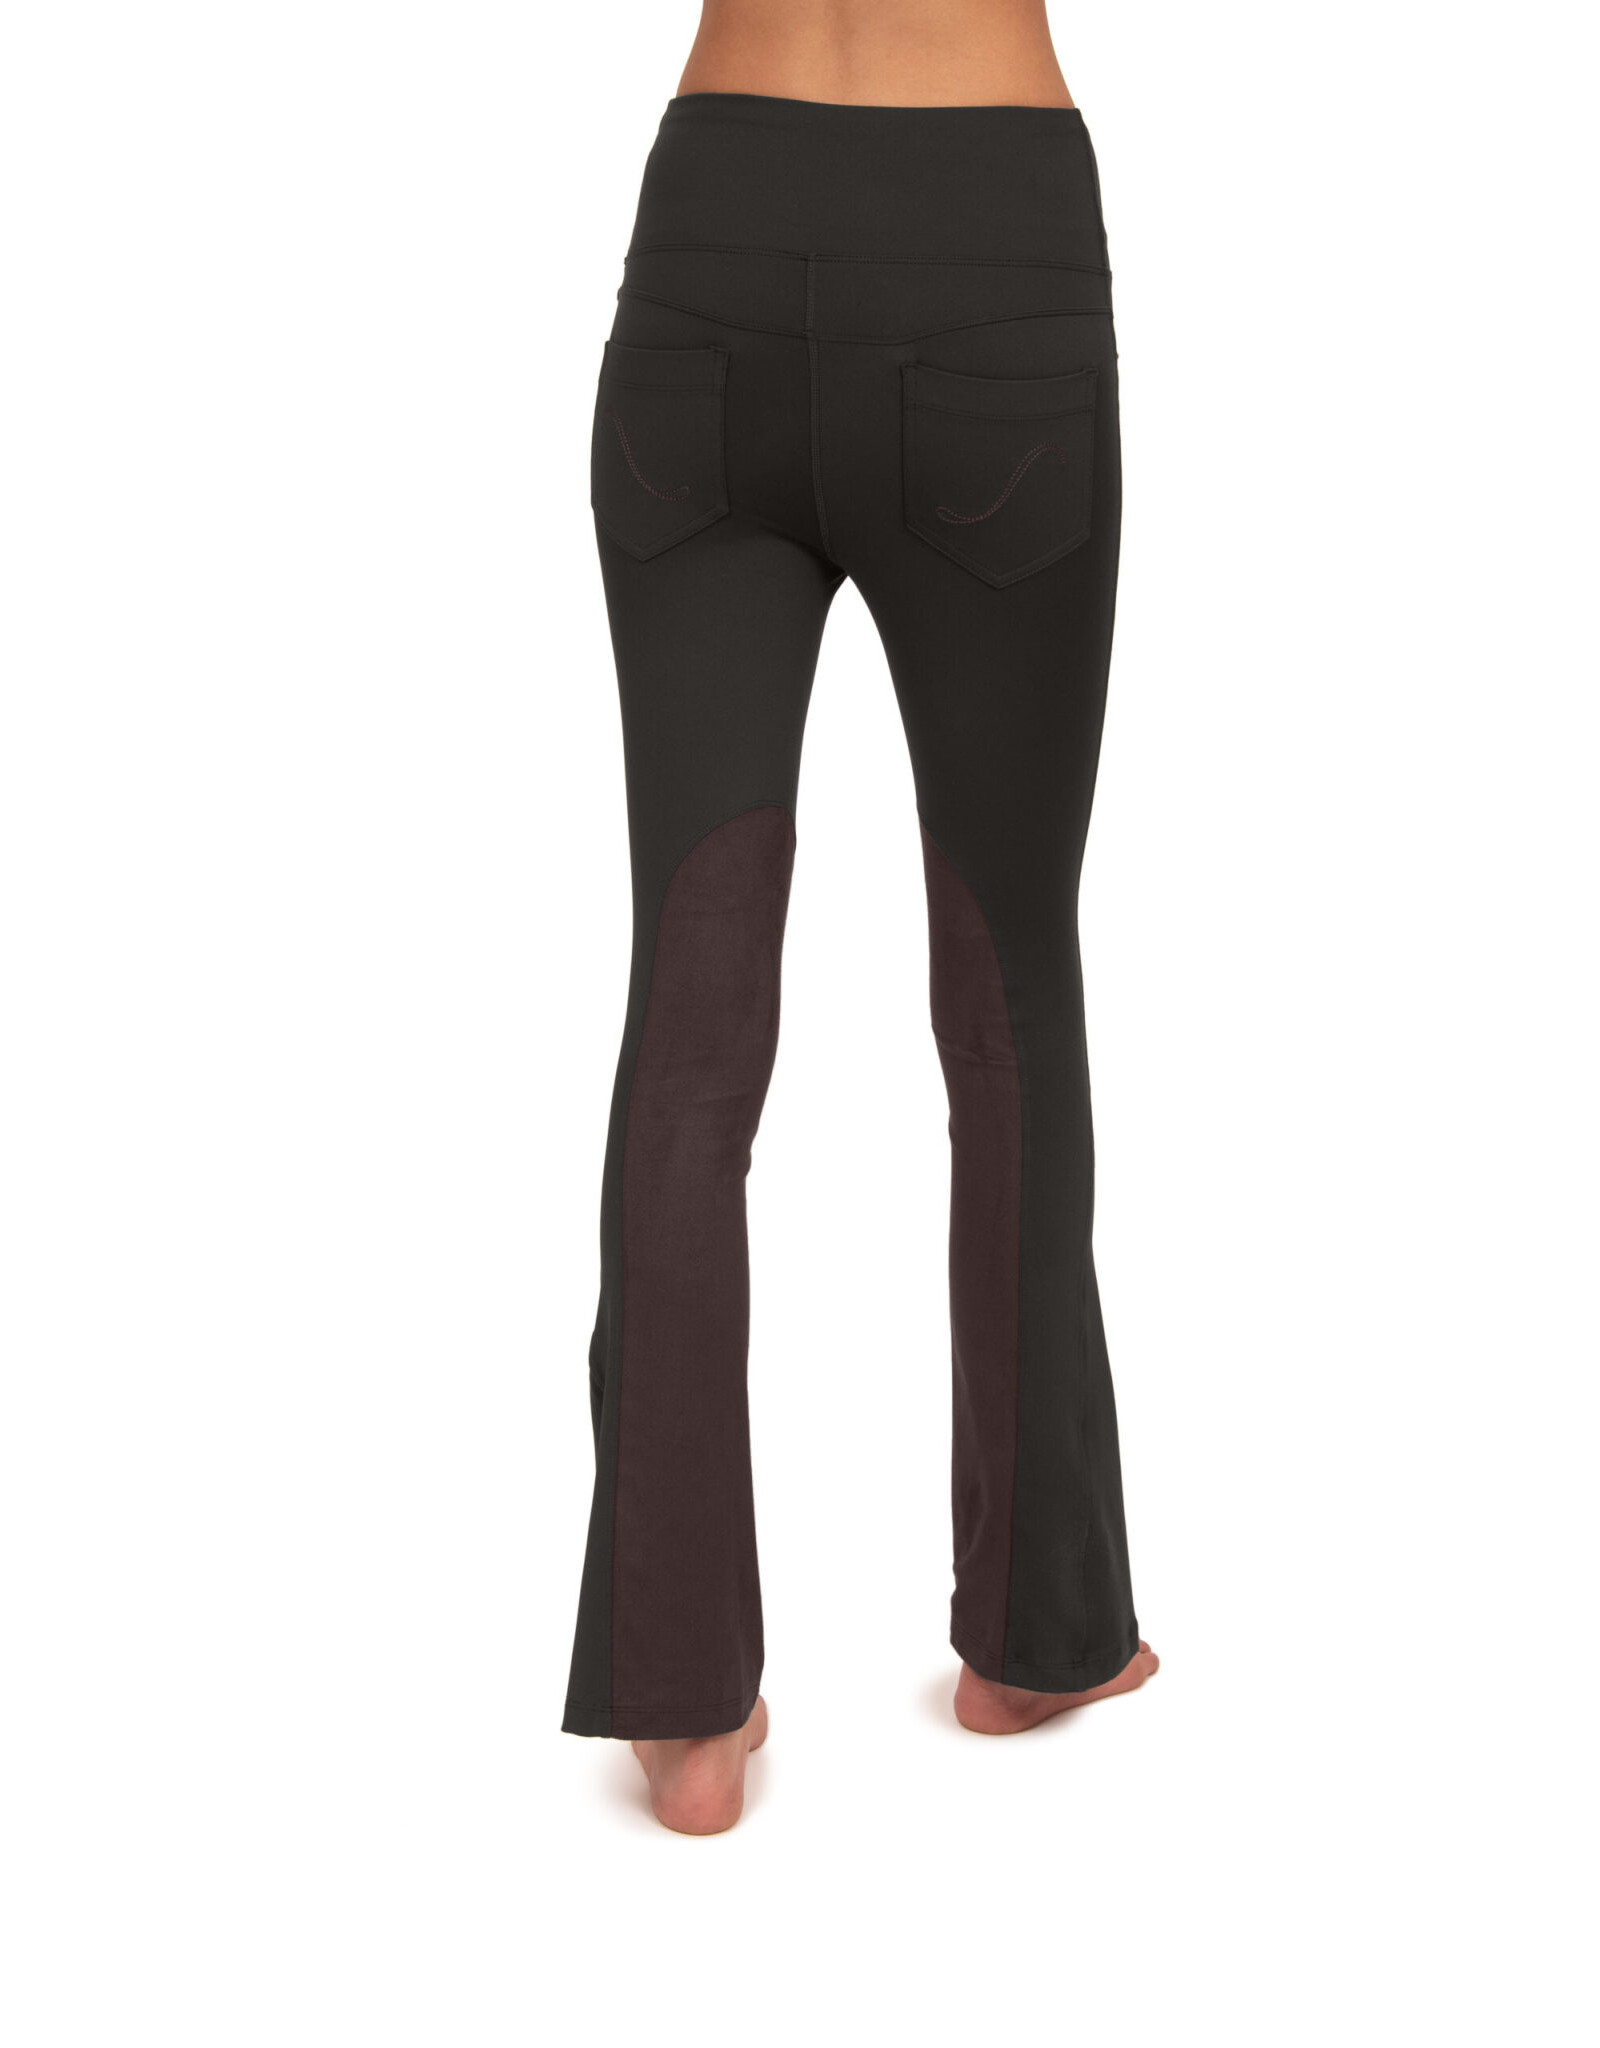 Chestnut Bay SkyCool® Bootcut Tights